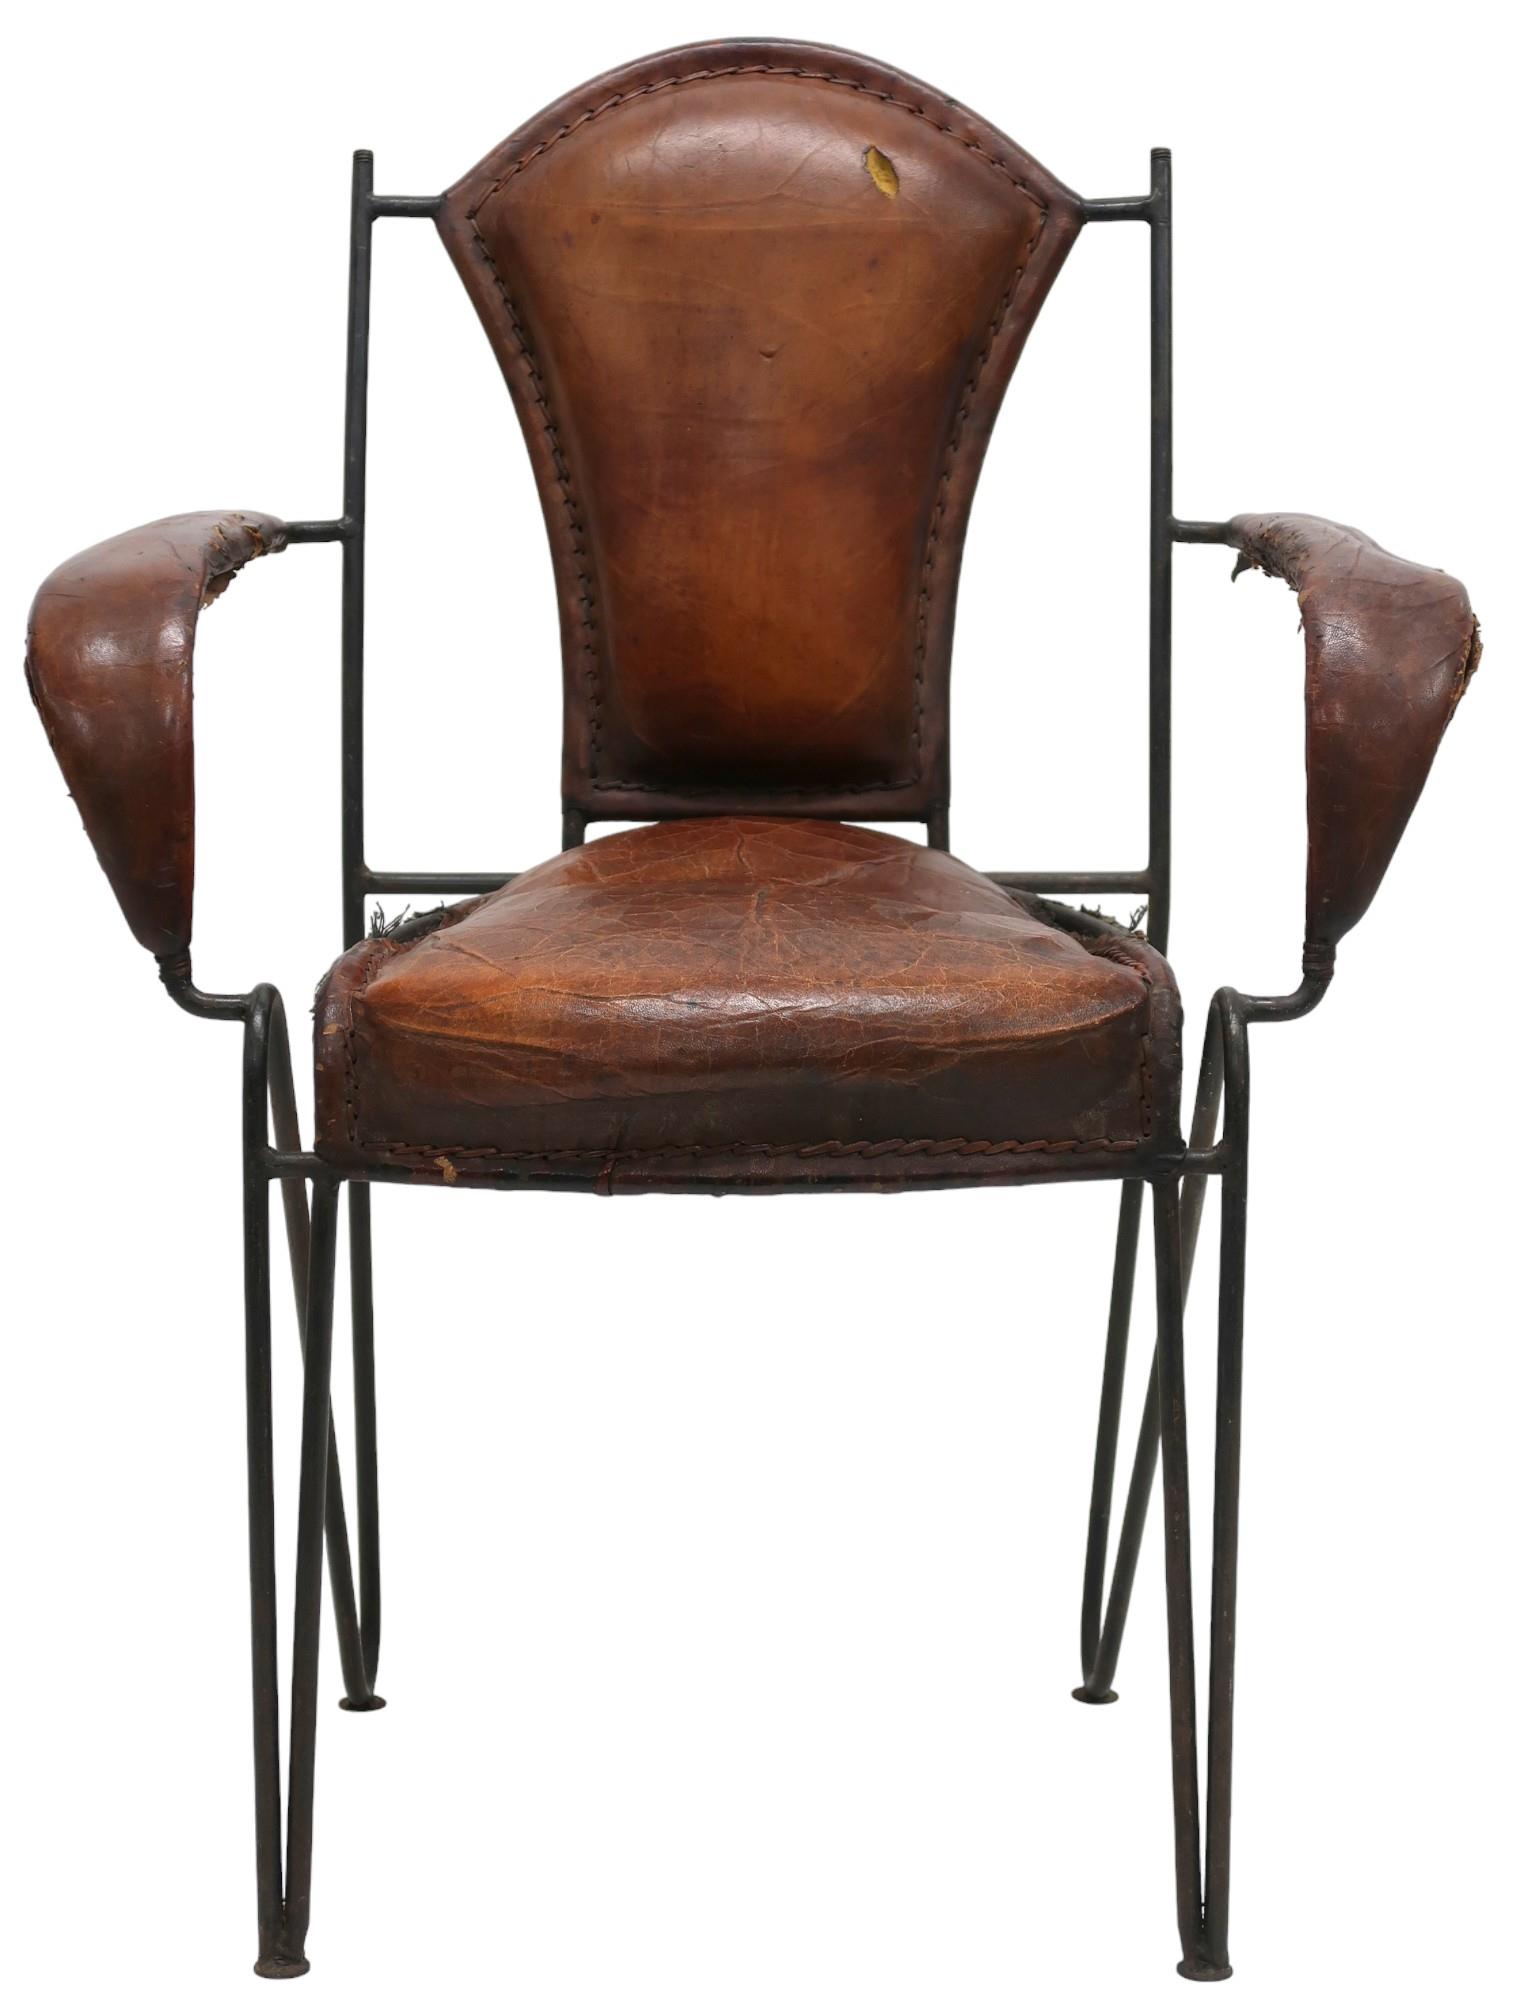 A MID 20TH CENTURY LEATHER & IRON ARMCHAIR AFTER JACQUES ADNET with open armrests made with stitched